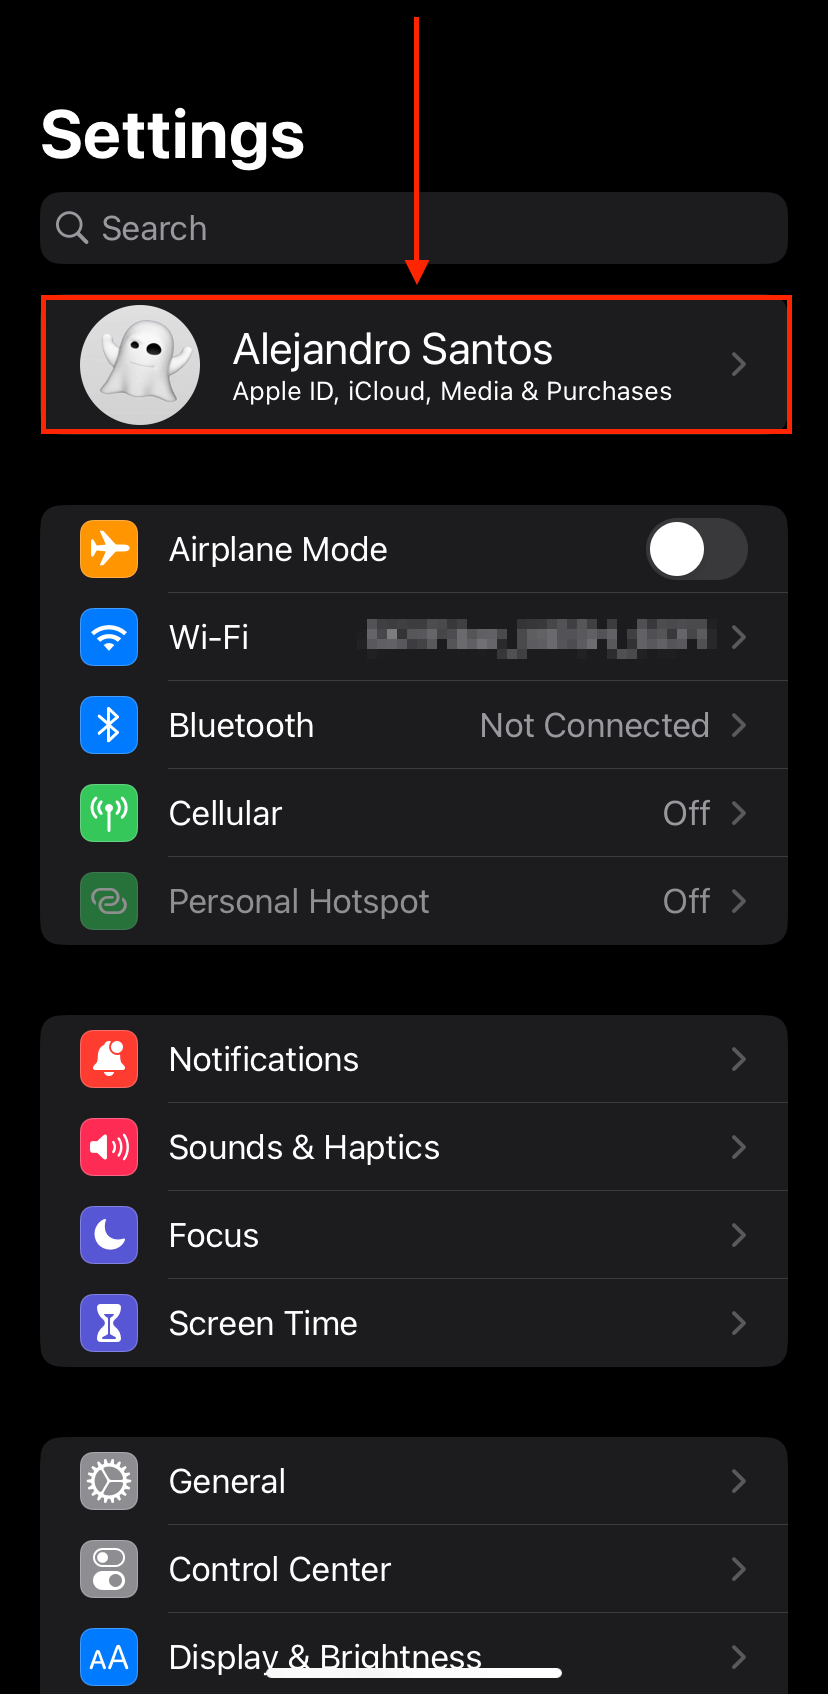 iPhone user card in the Settings app